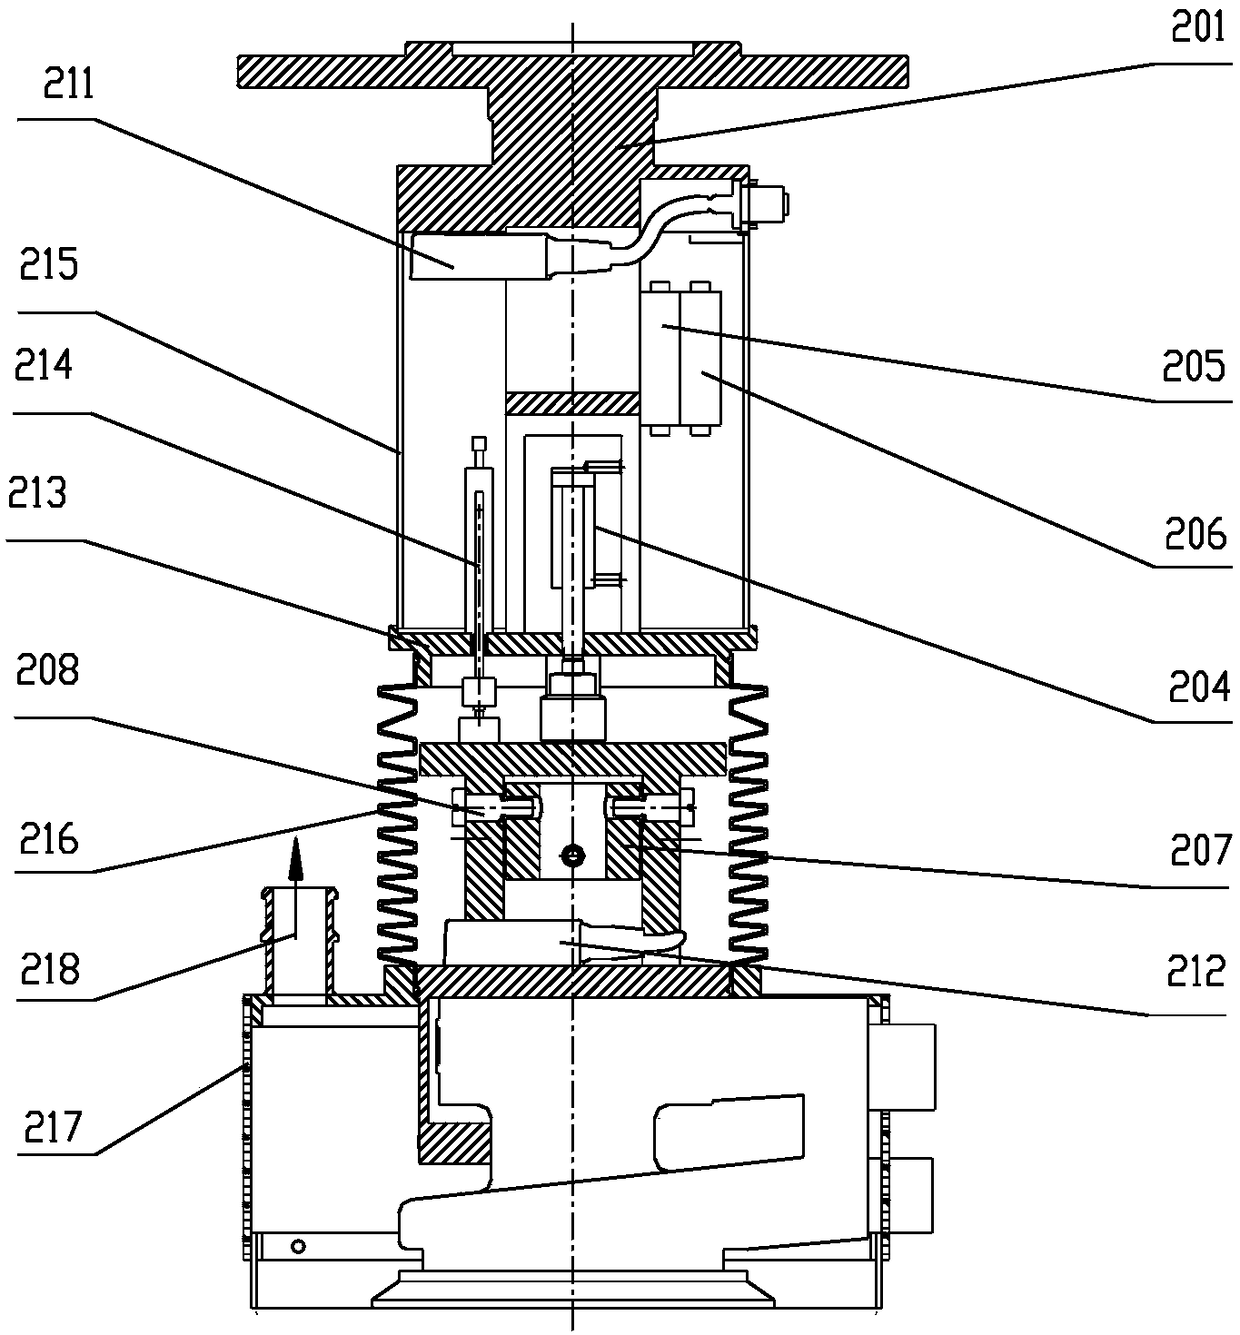 Constant force actuator for installing grinding head